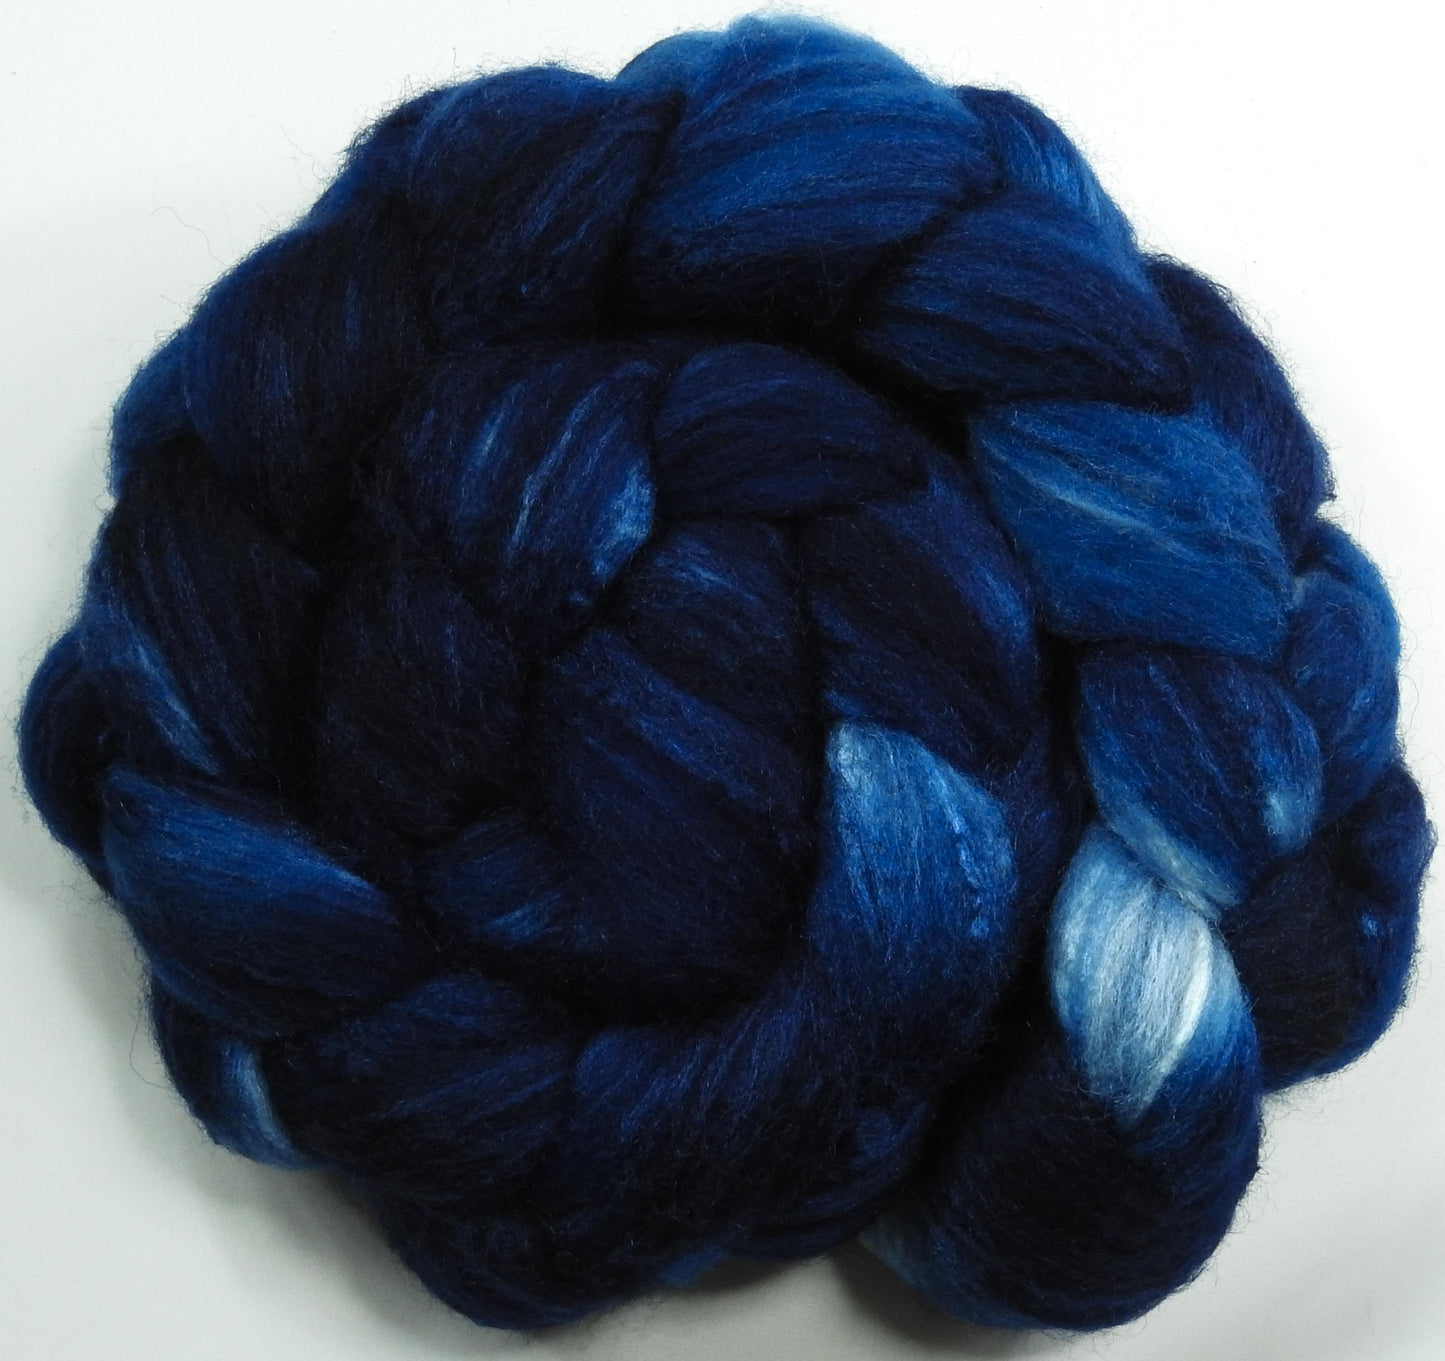 Lights Out-(5.9 oz) British Southdown/ tussah top (65/ 35)